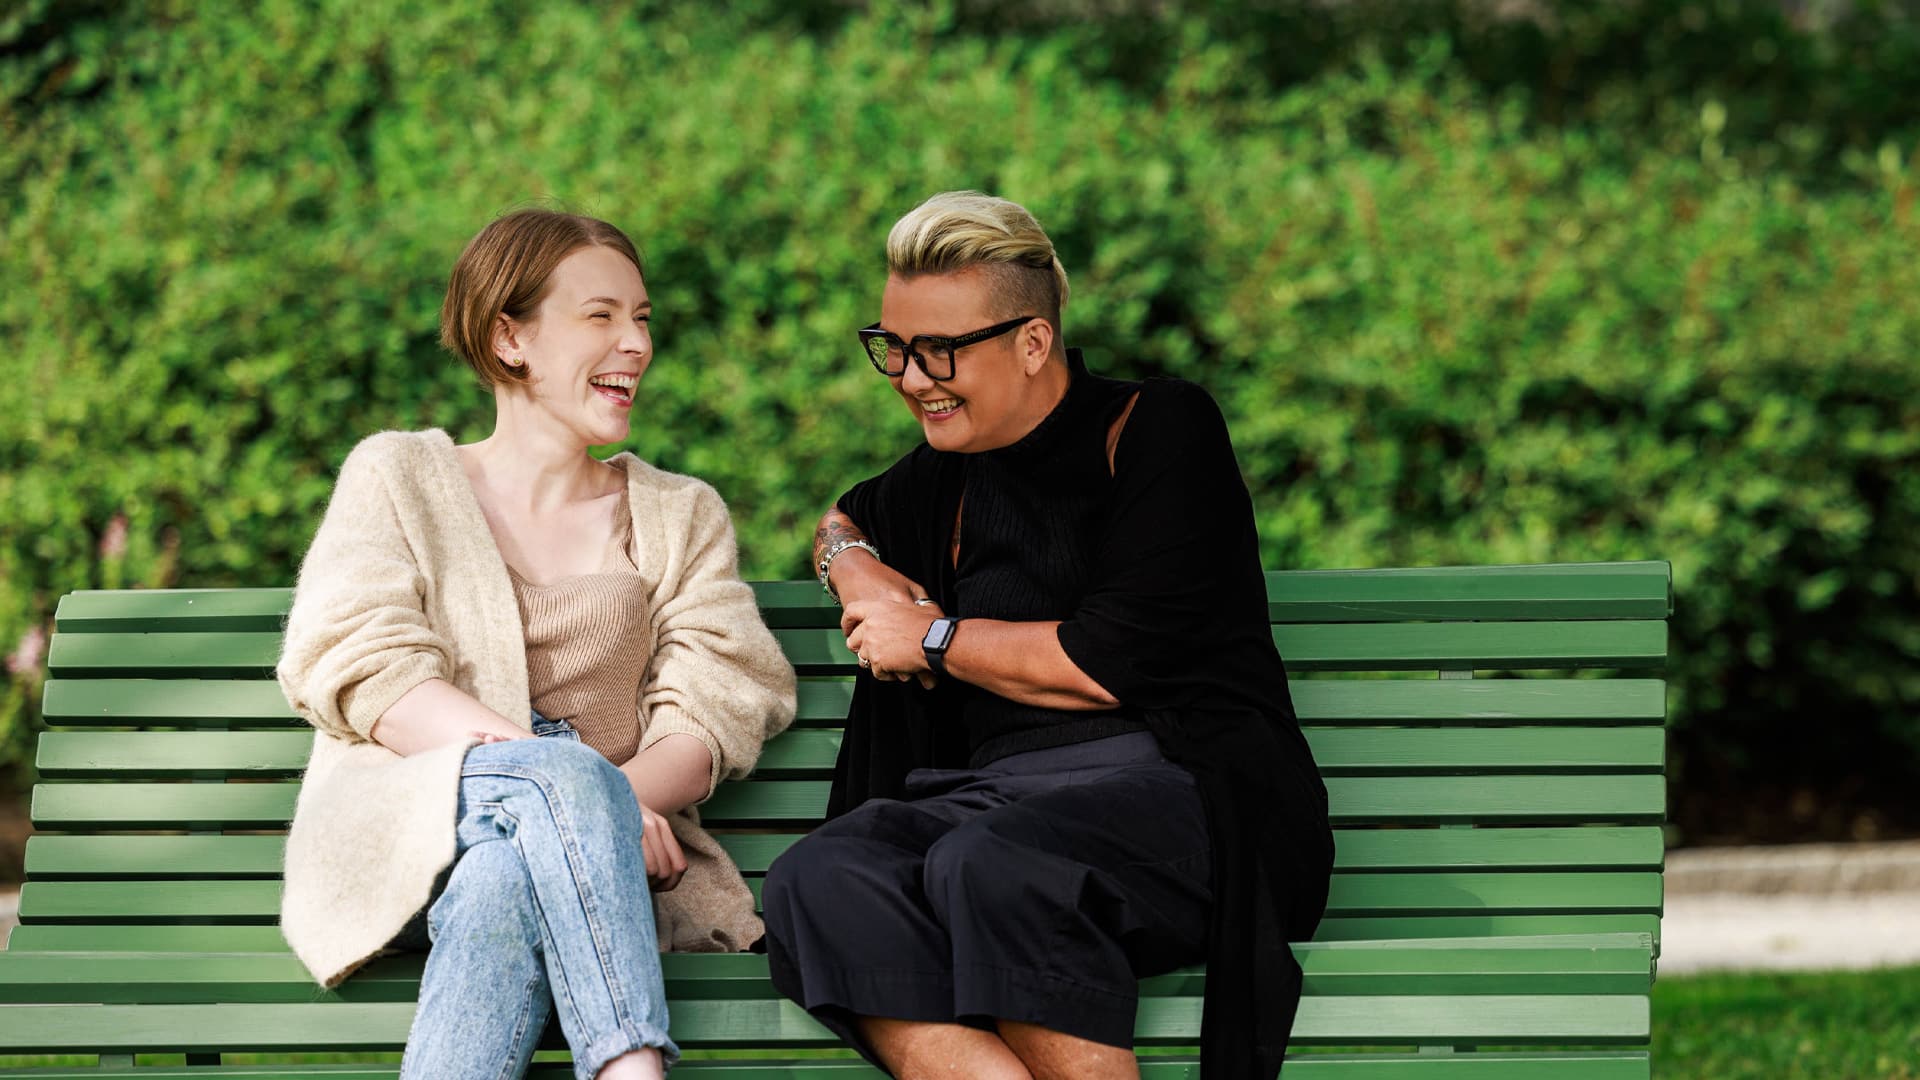 Two women sitting on a bench laughing